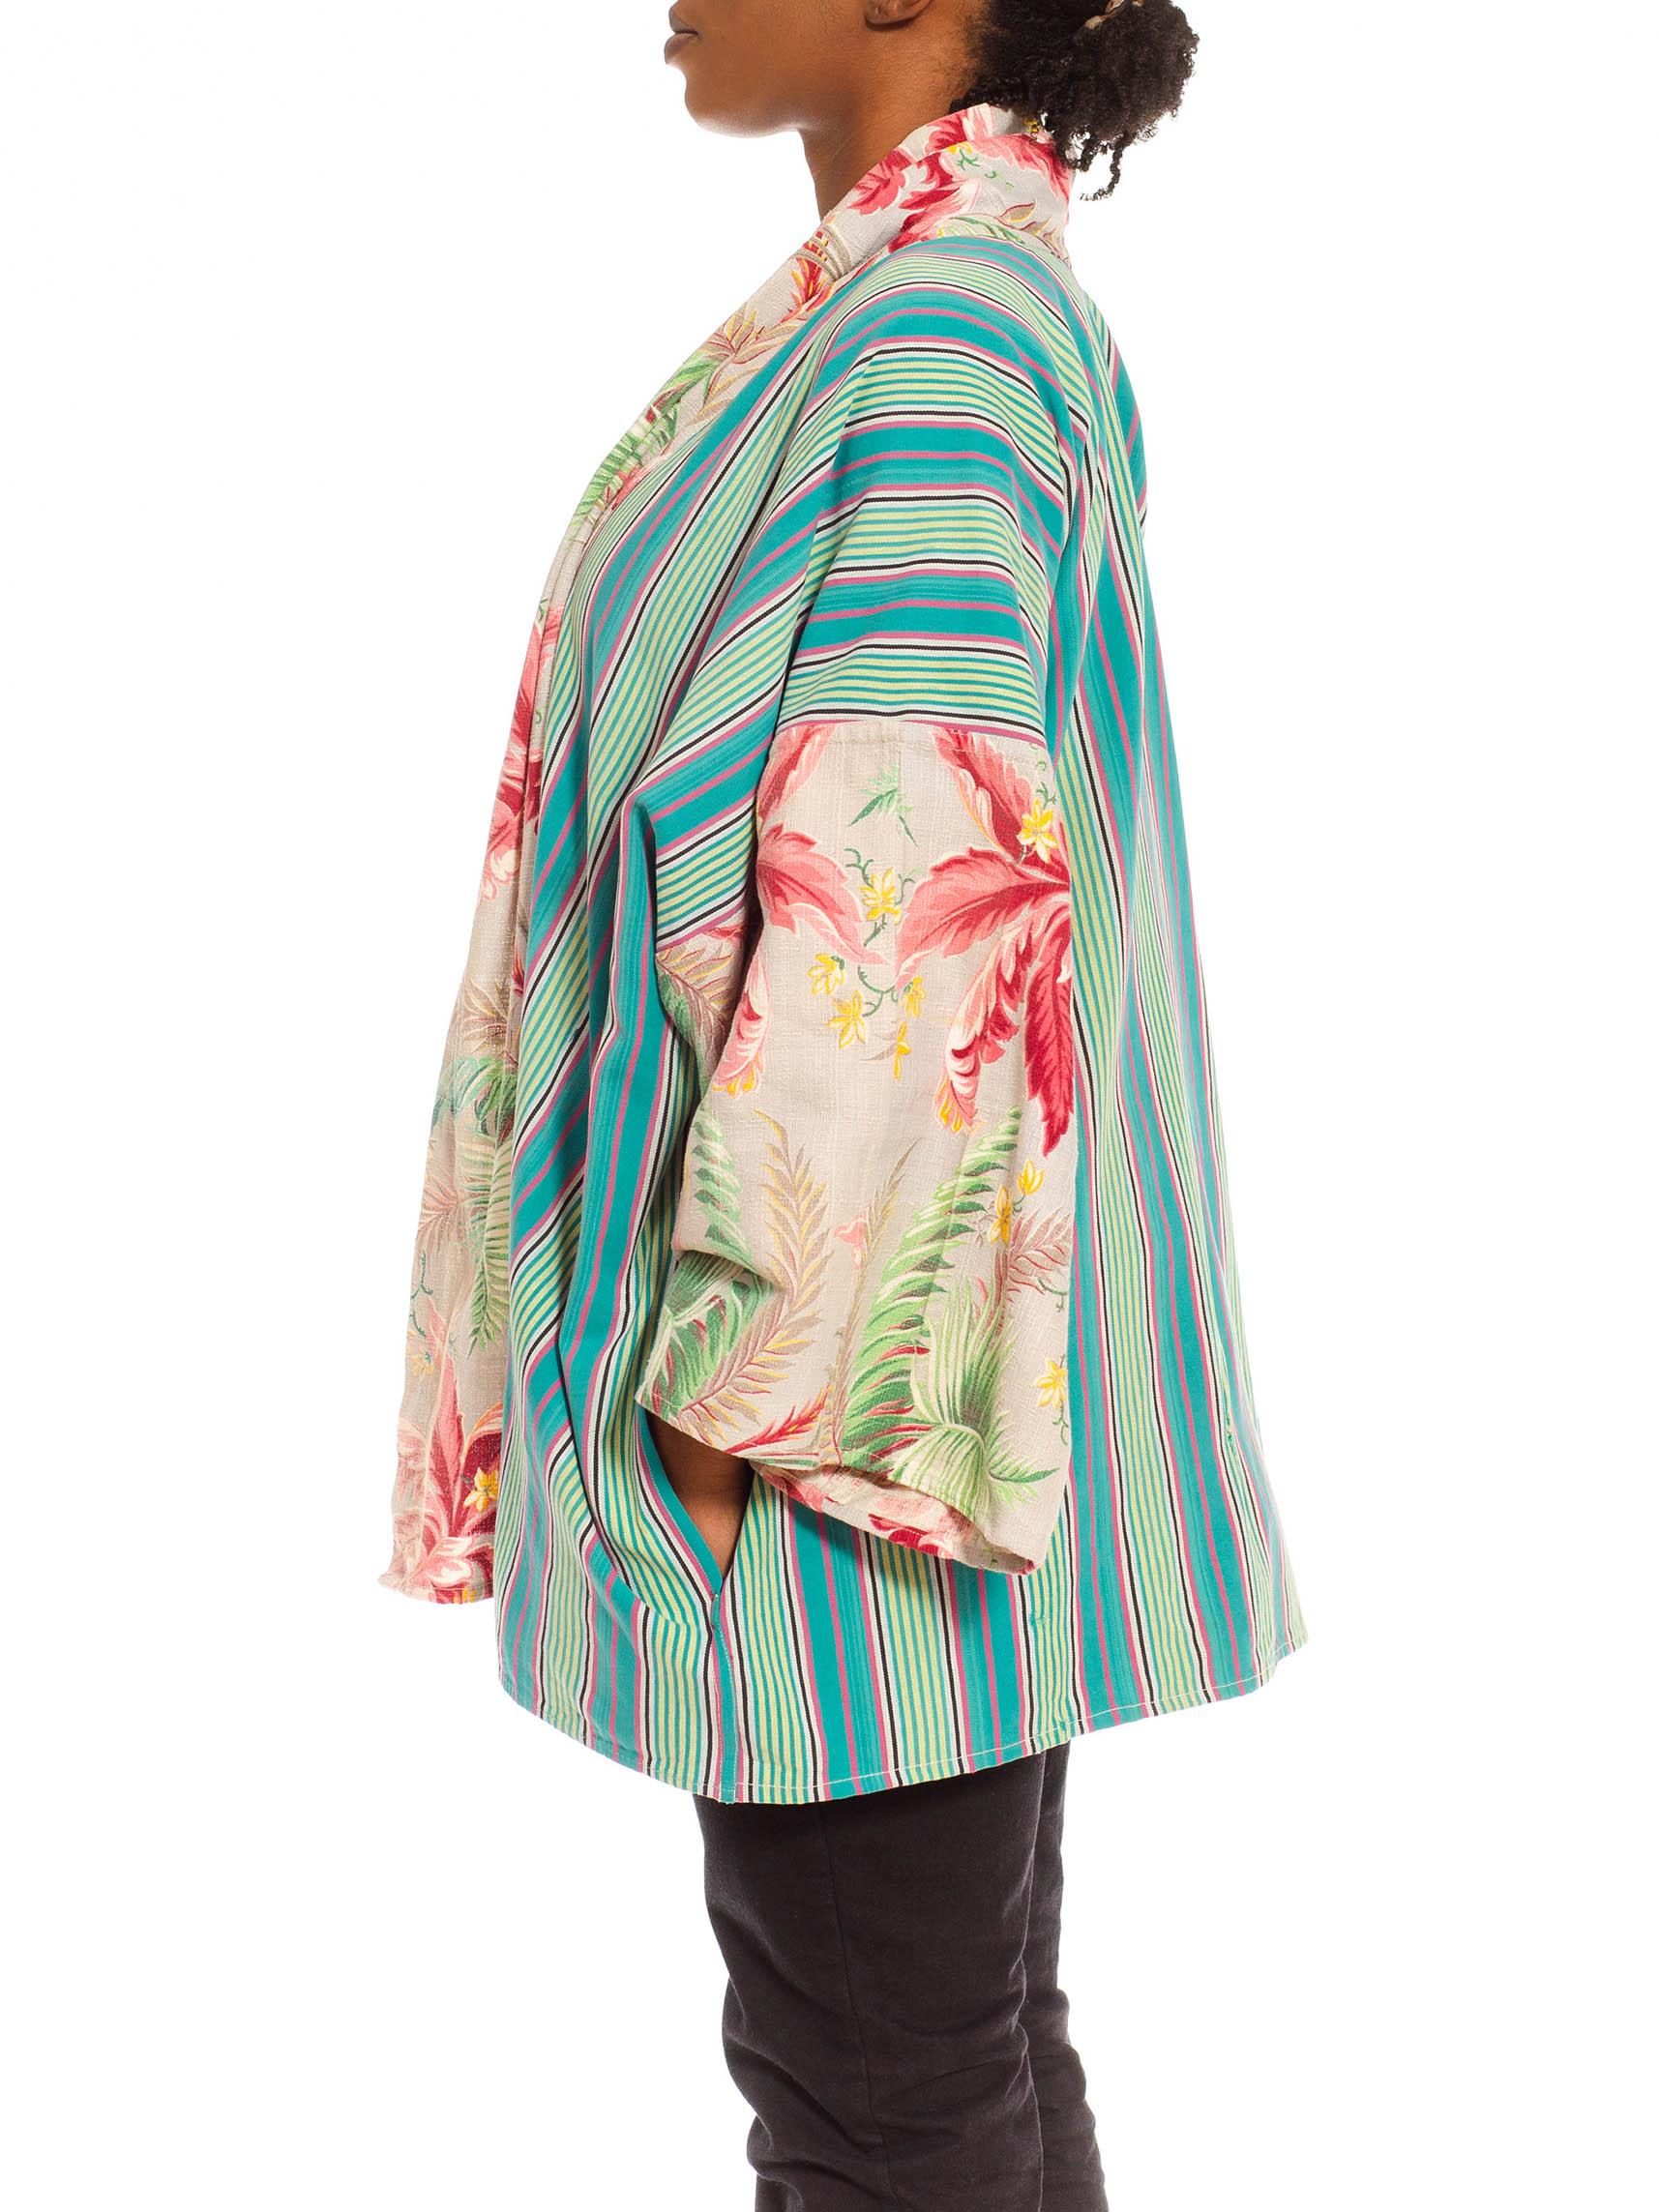 Made from vintage fabrics so small areas of wear or vintage repairs are expected and add to the story of the piece. Morphew Collection Blue & Pink Cotton African Stripe 1940S Tropical Duster 
MORPHEW COLLECTION is made entirely by hand in our NYC